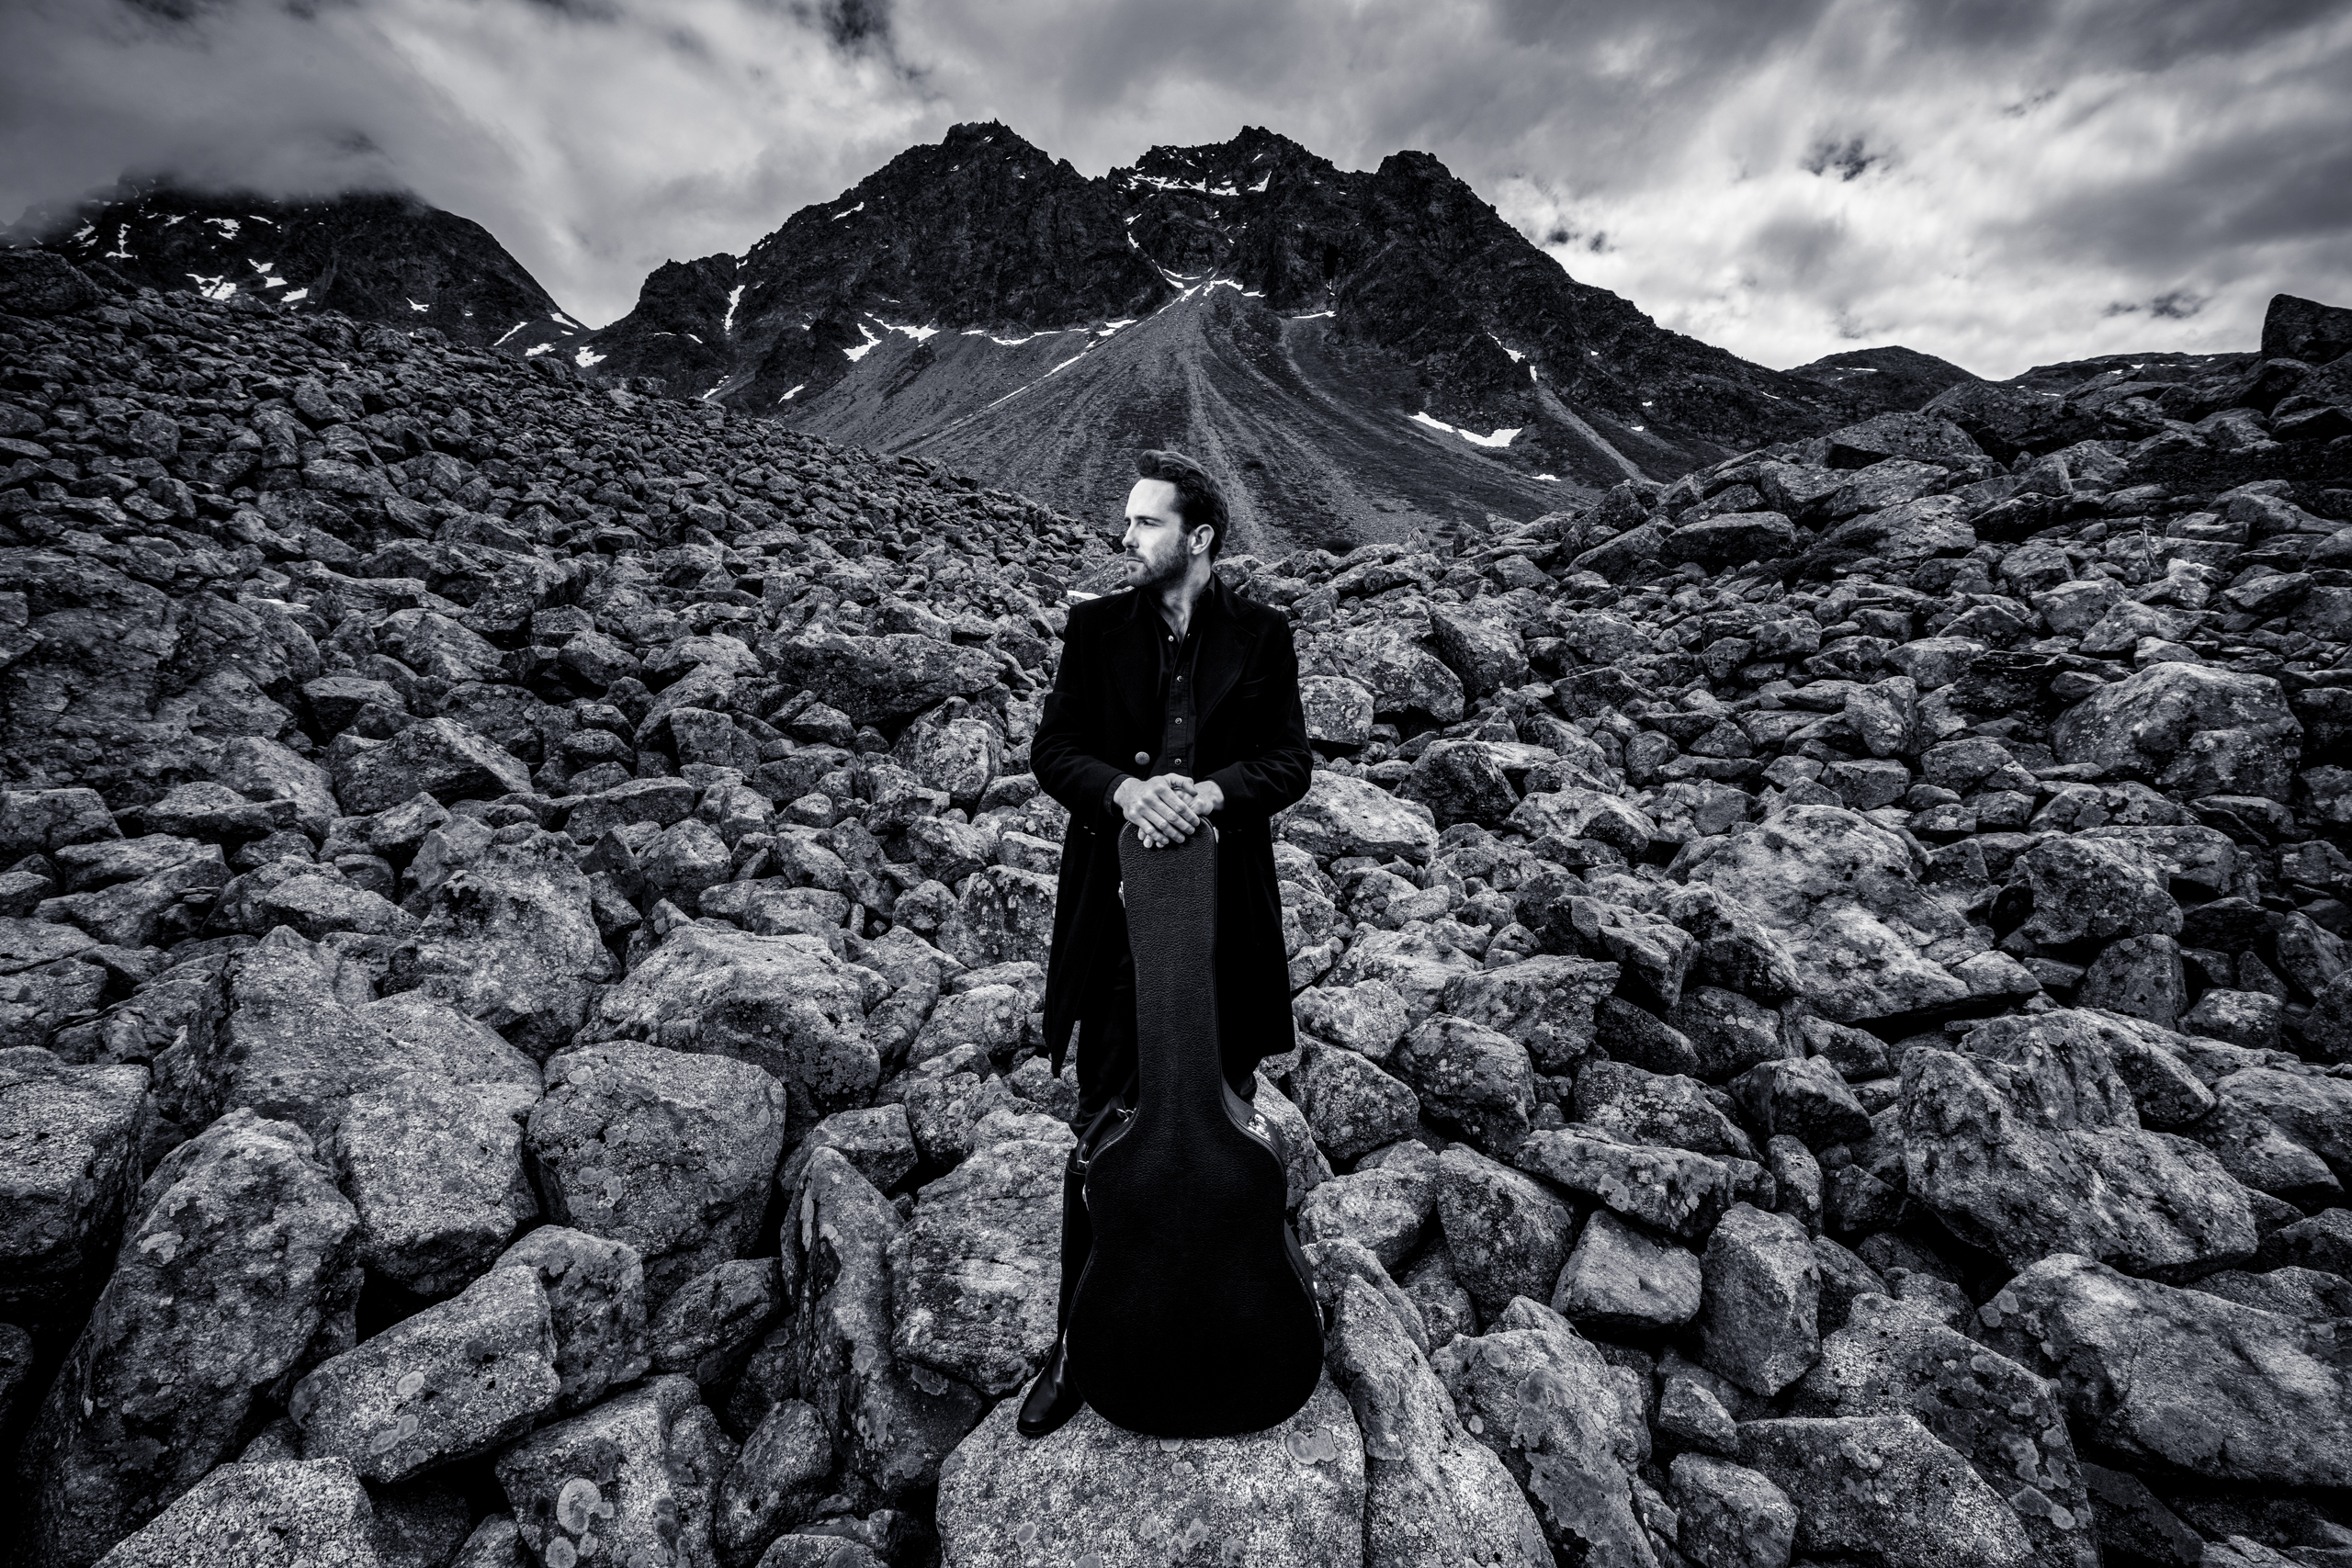 Florian Fox in front of a mountain with his guitar